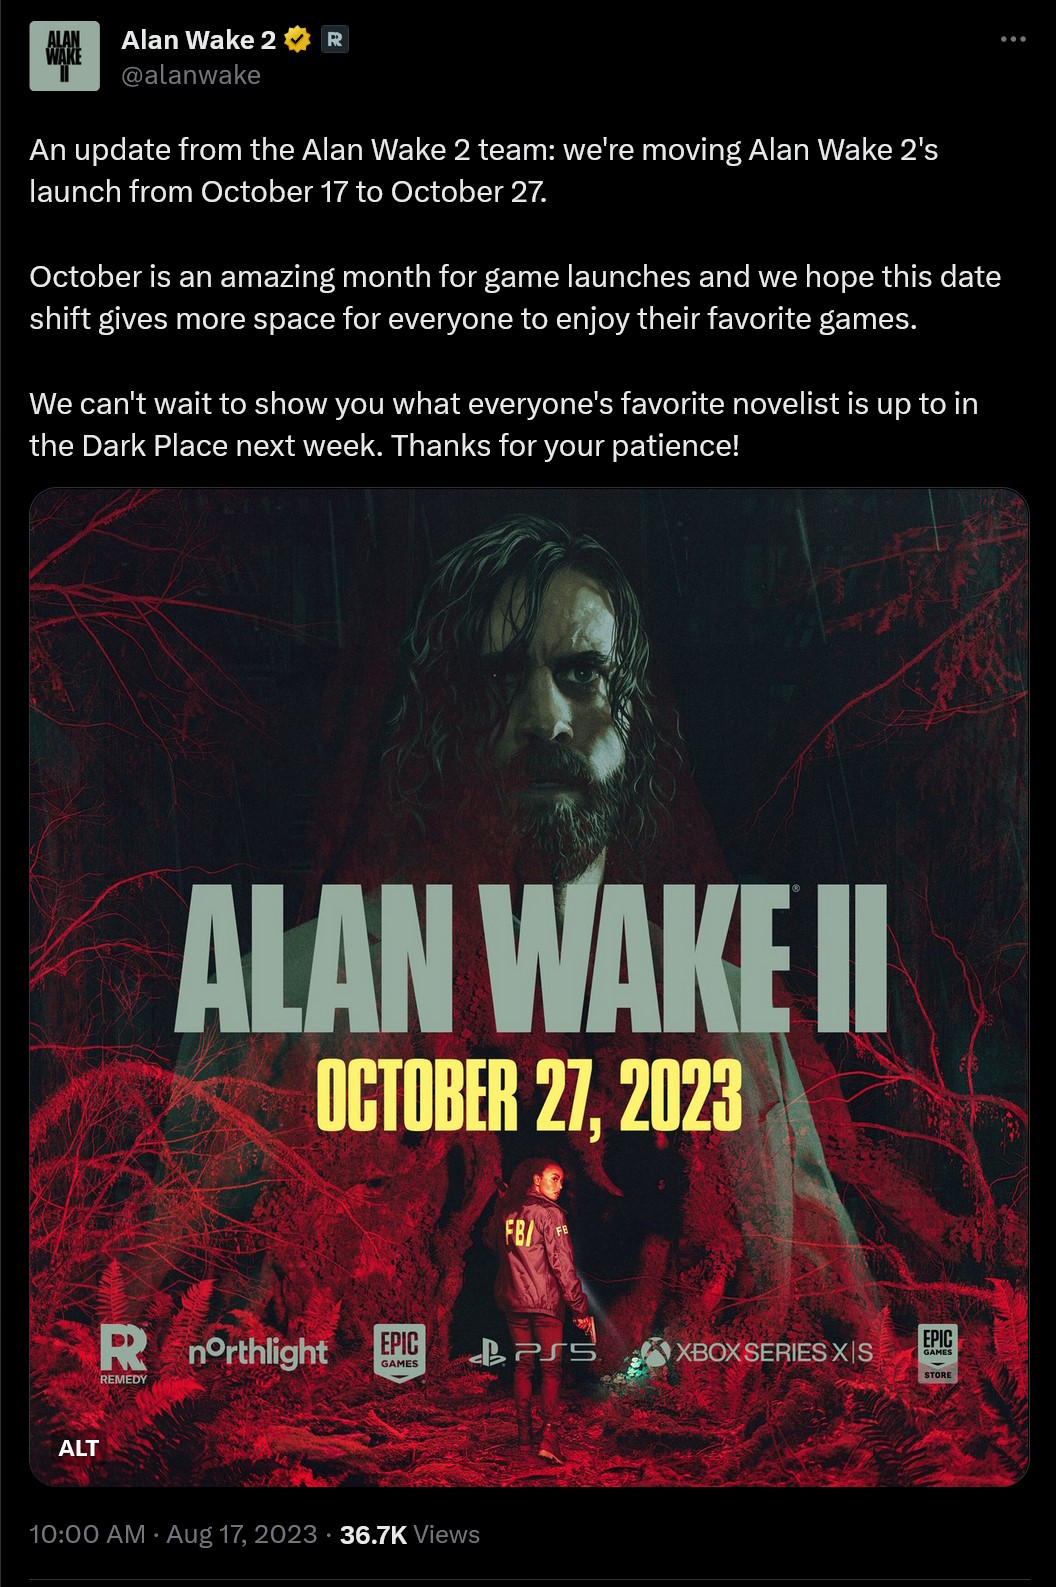 An update from the Alan Wake 2 team: we're moving Alan Wake 2's launch from October 17 to October 27.  October is an amazing month for game launches and we hope this date shift gives more space for everyone to enjoy their favorite games.  We can't wait to show you what everyone's favorite novelist is up to in the Dark Place next week. Thanks for your patience!